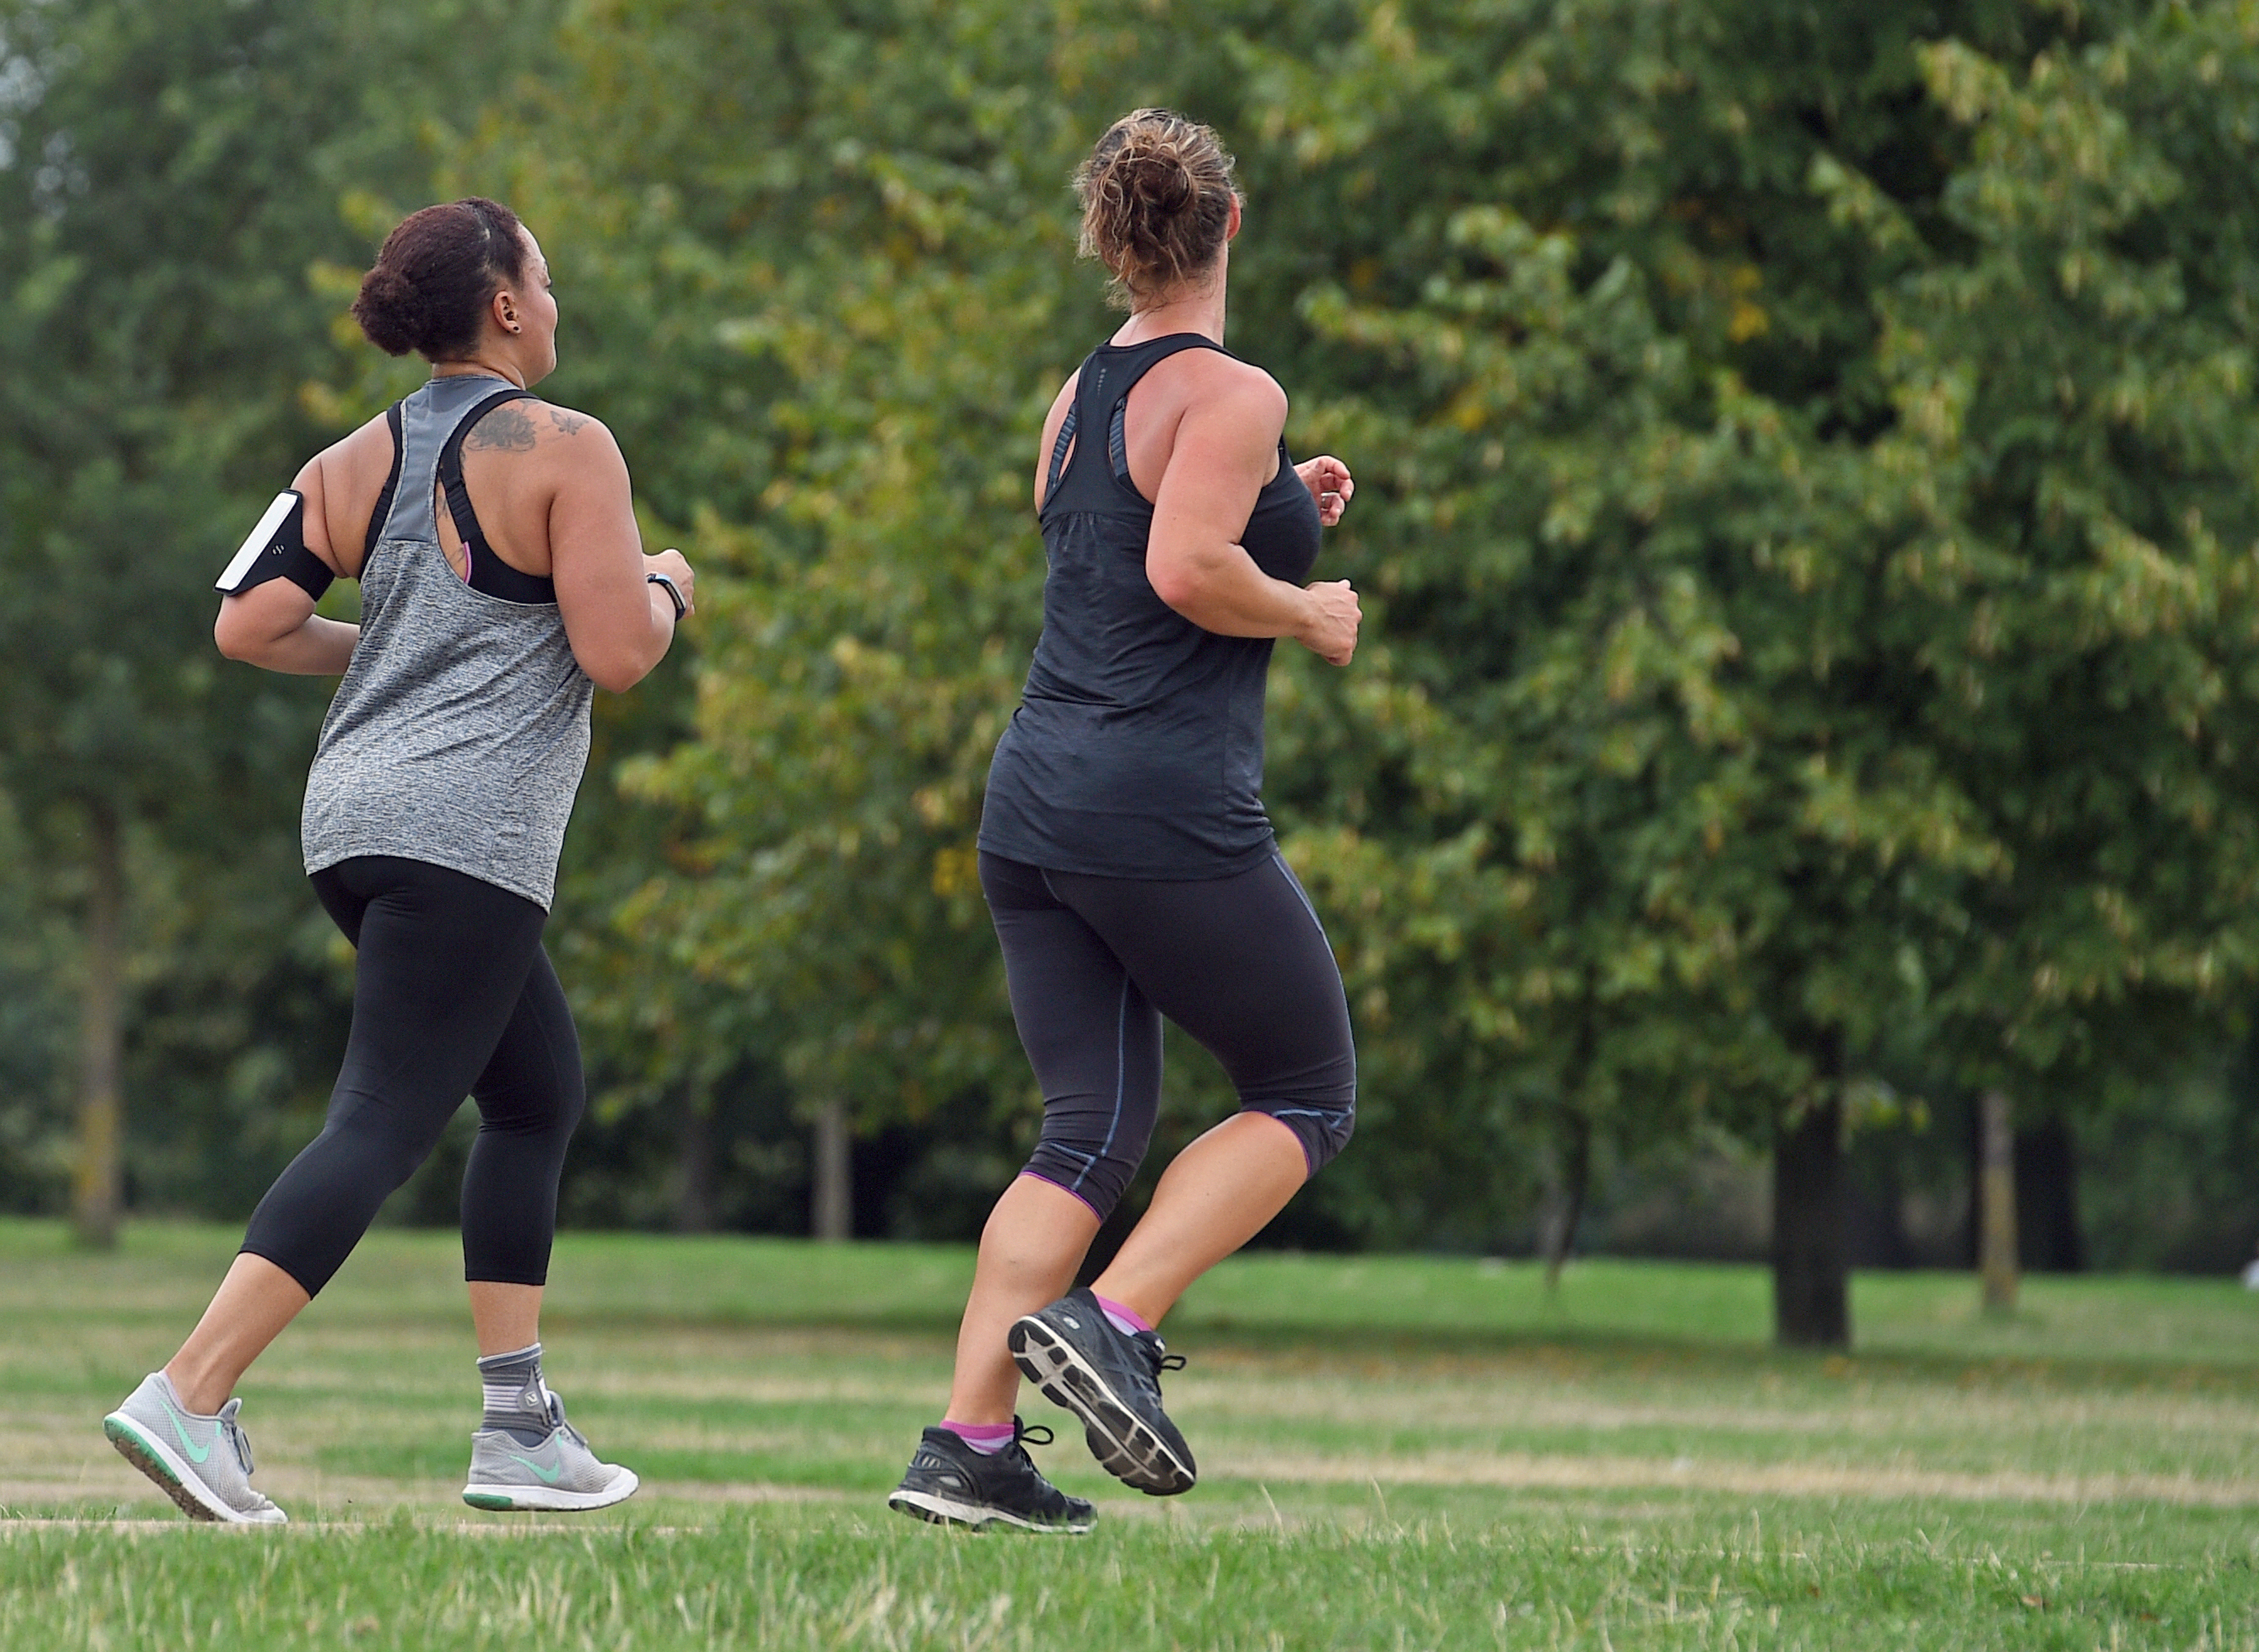 Running three times a week could cut breast cancer risk by a third